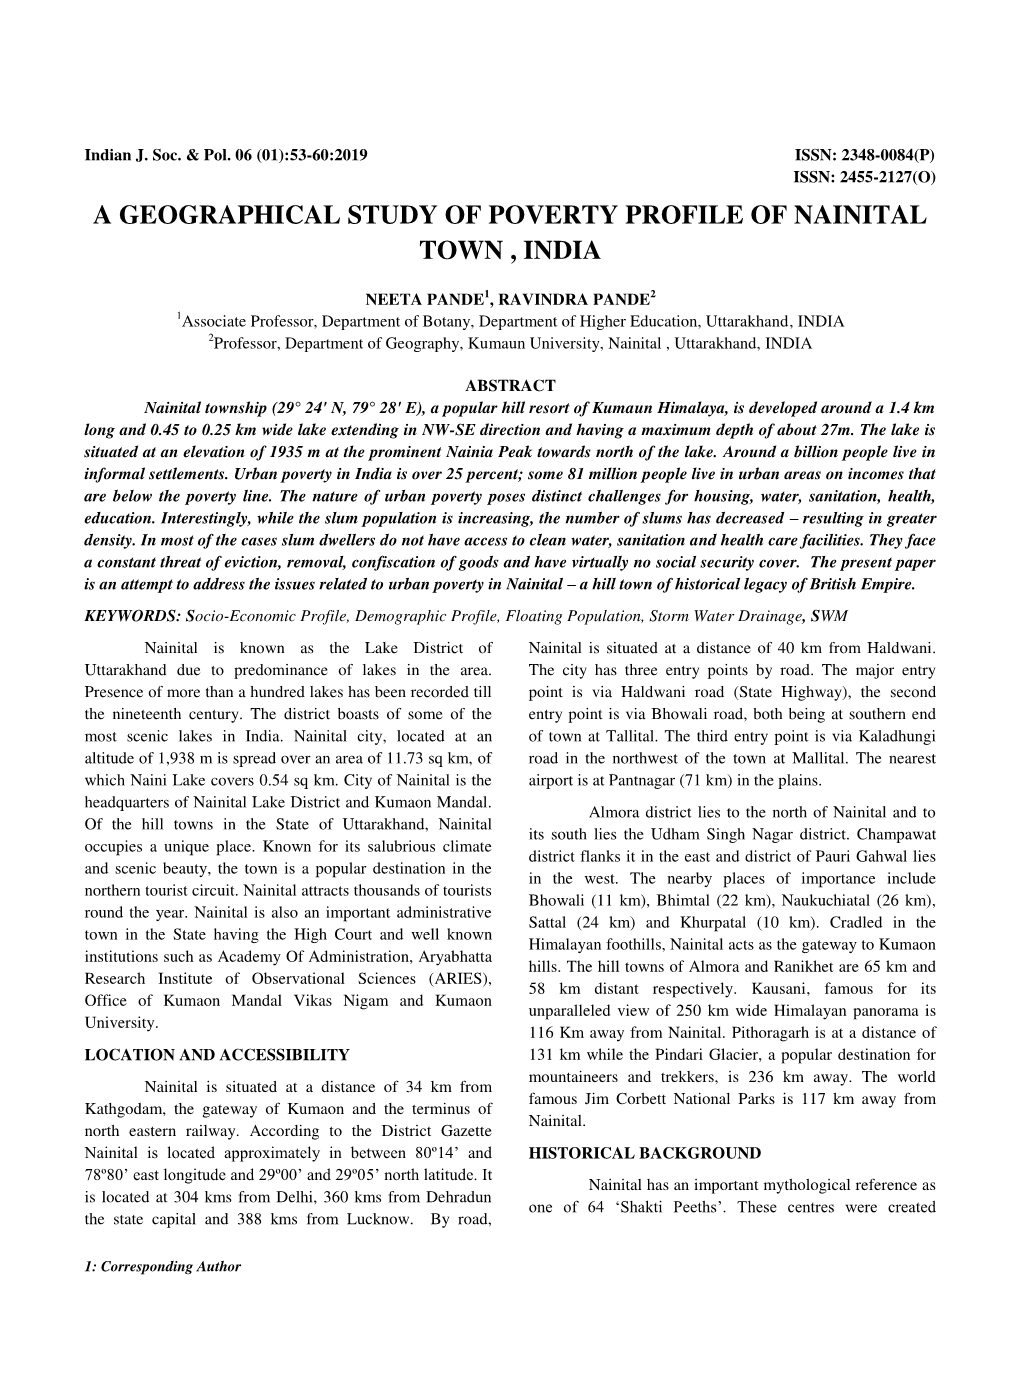 A Geographical Study of Poverty Profile of Nainital Town , India